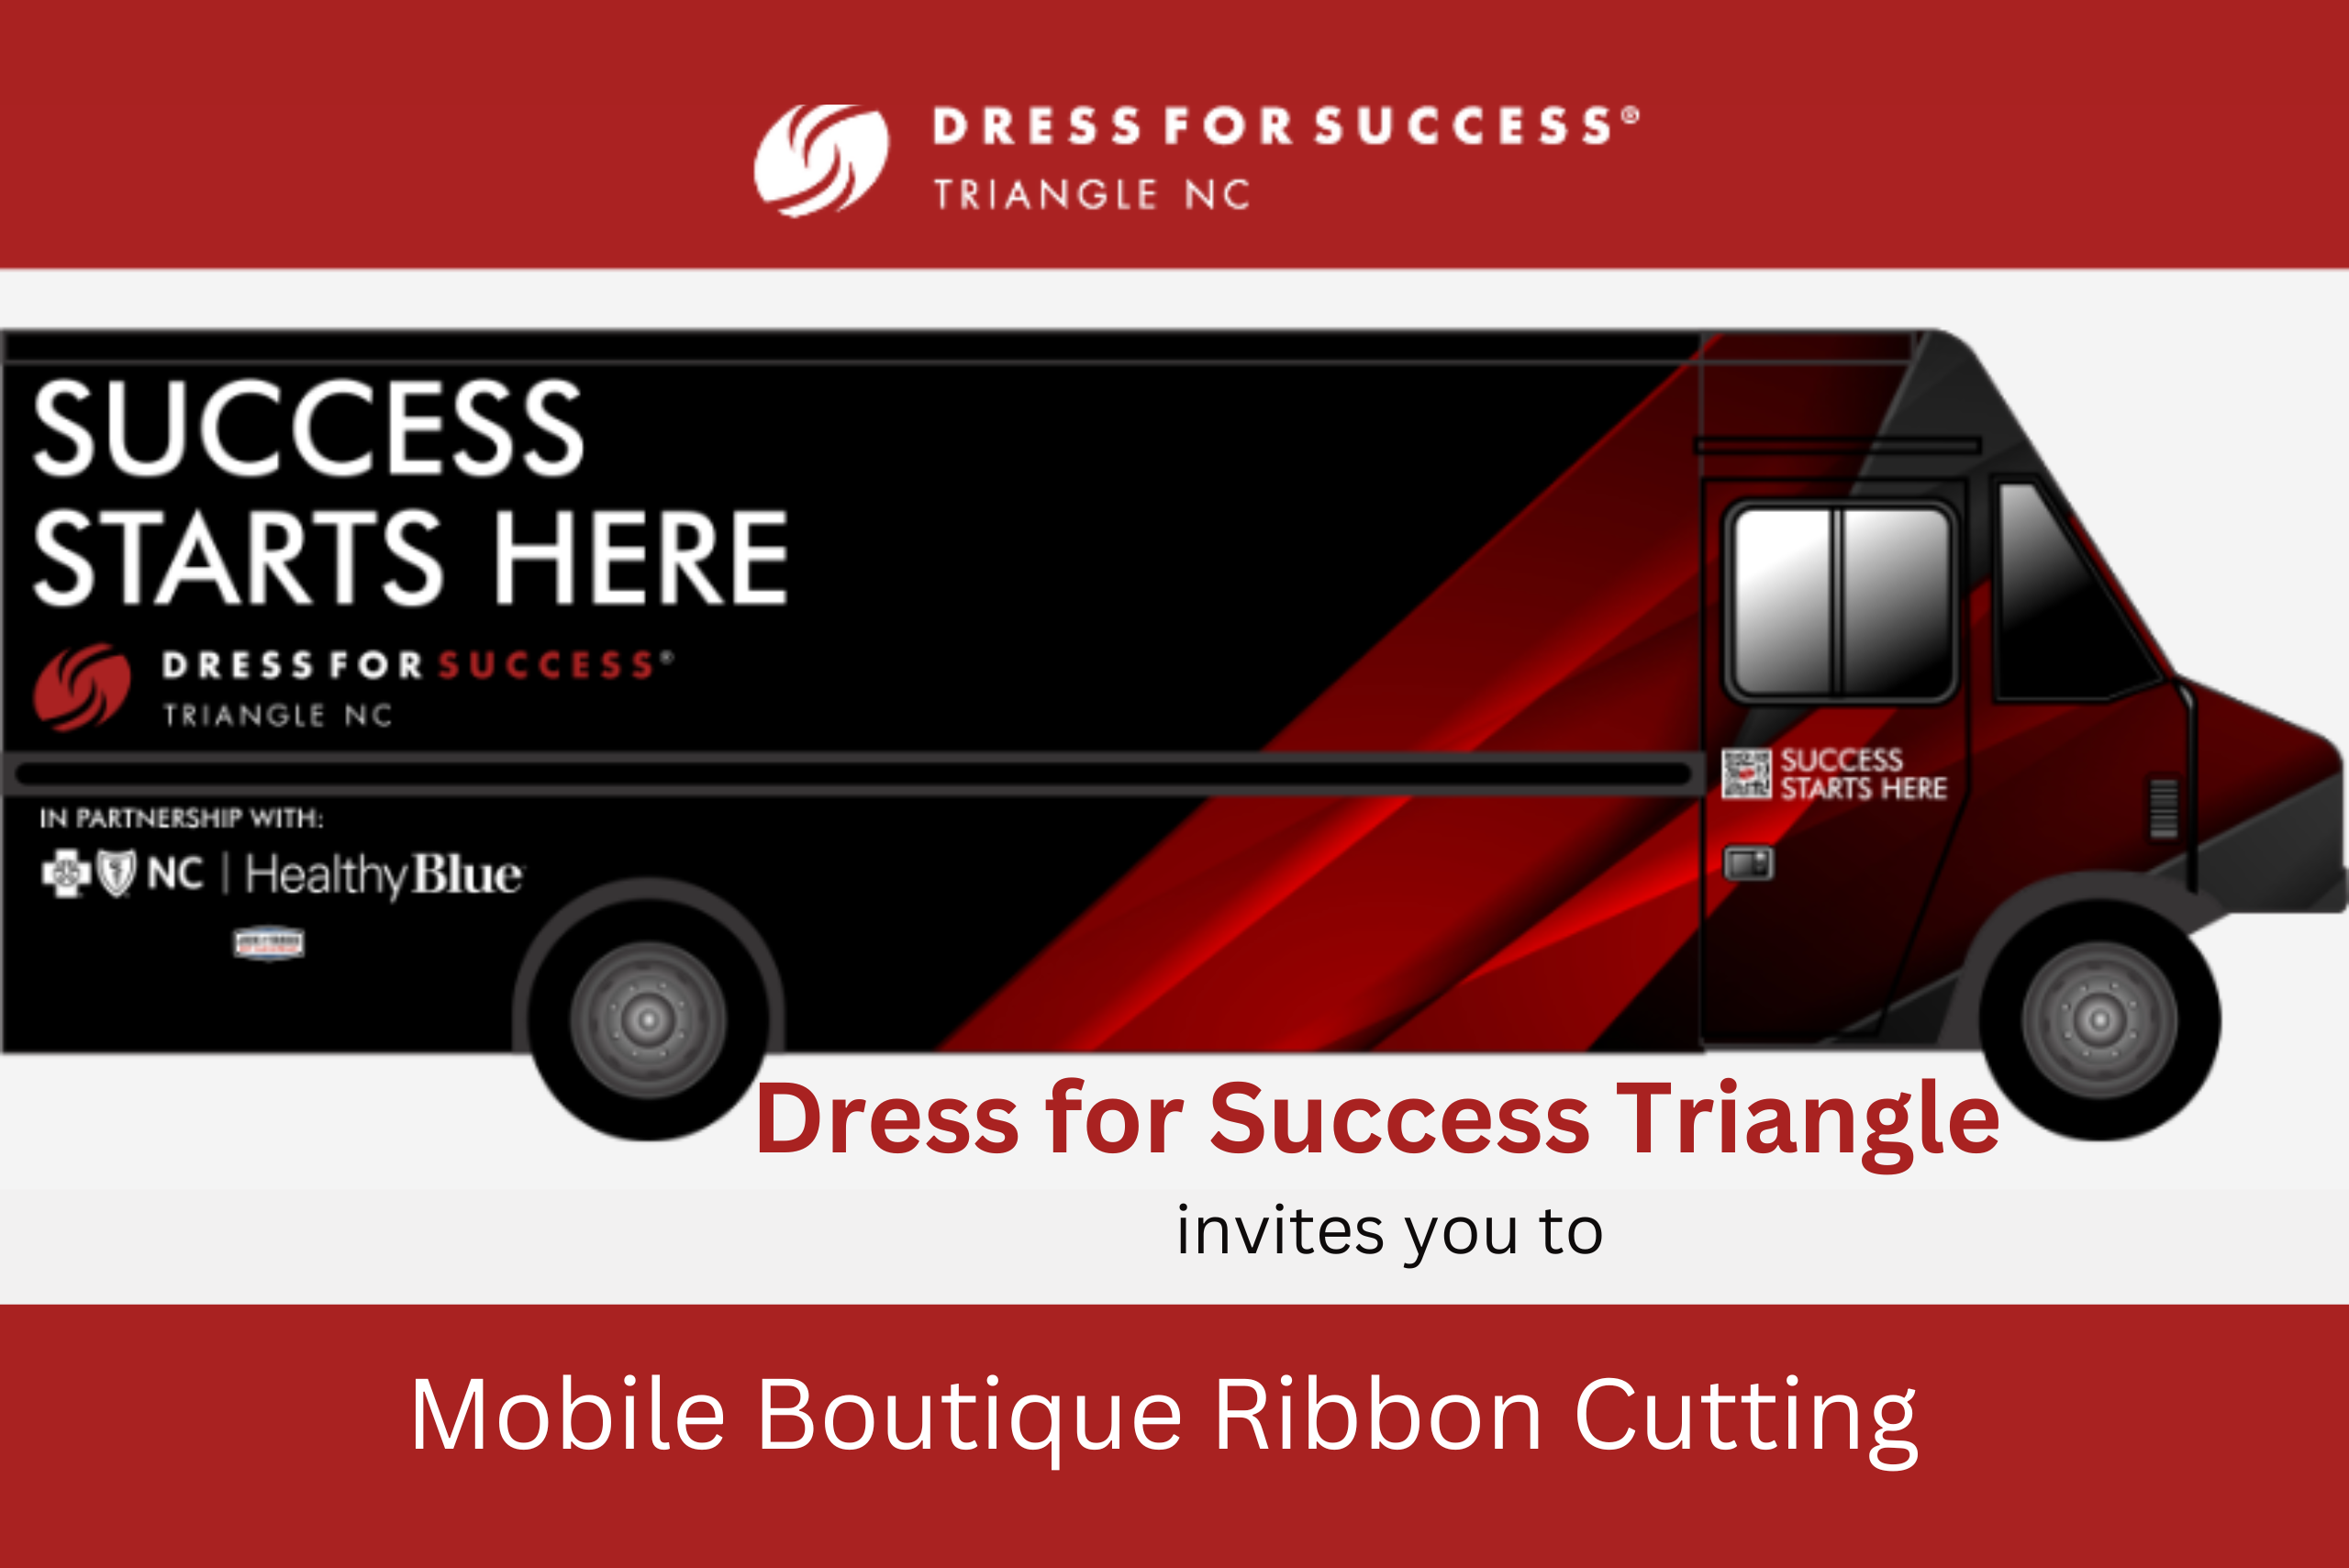 Dress for Success Mobile Boutique Ribbon Cutting